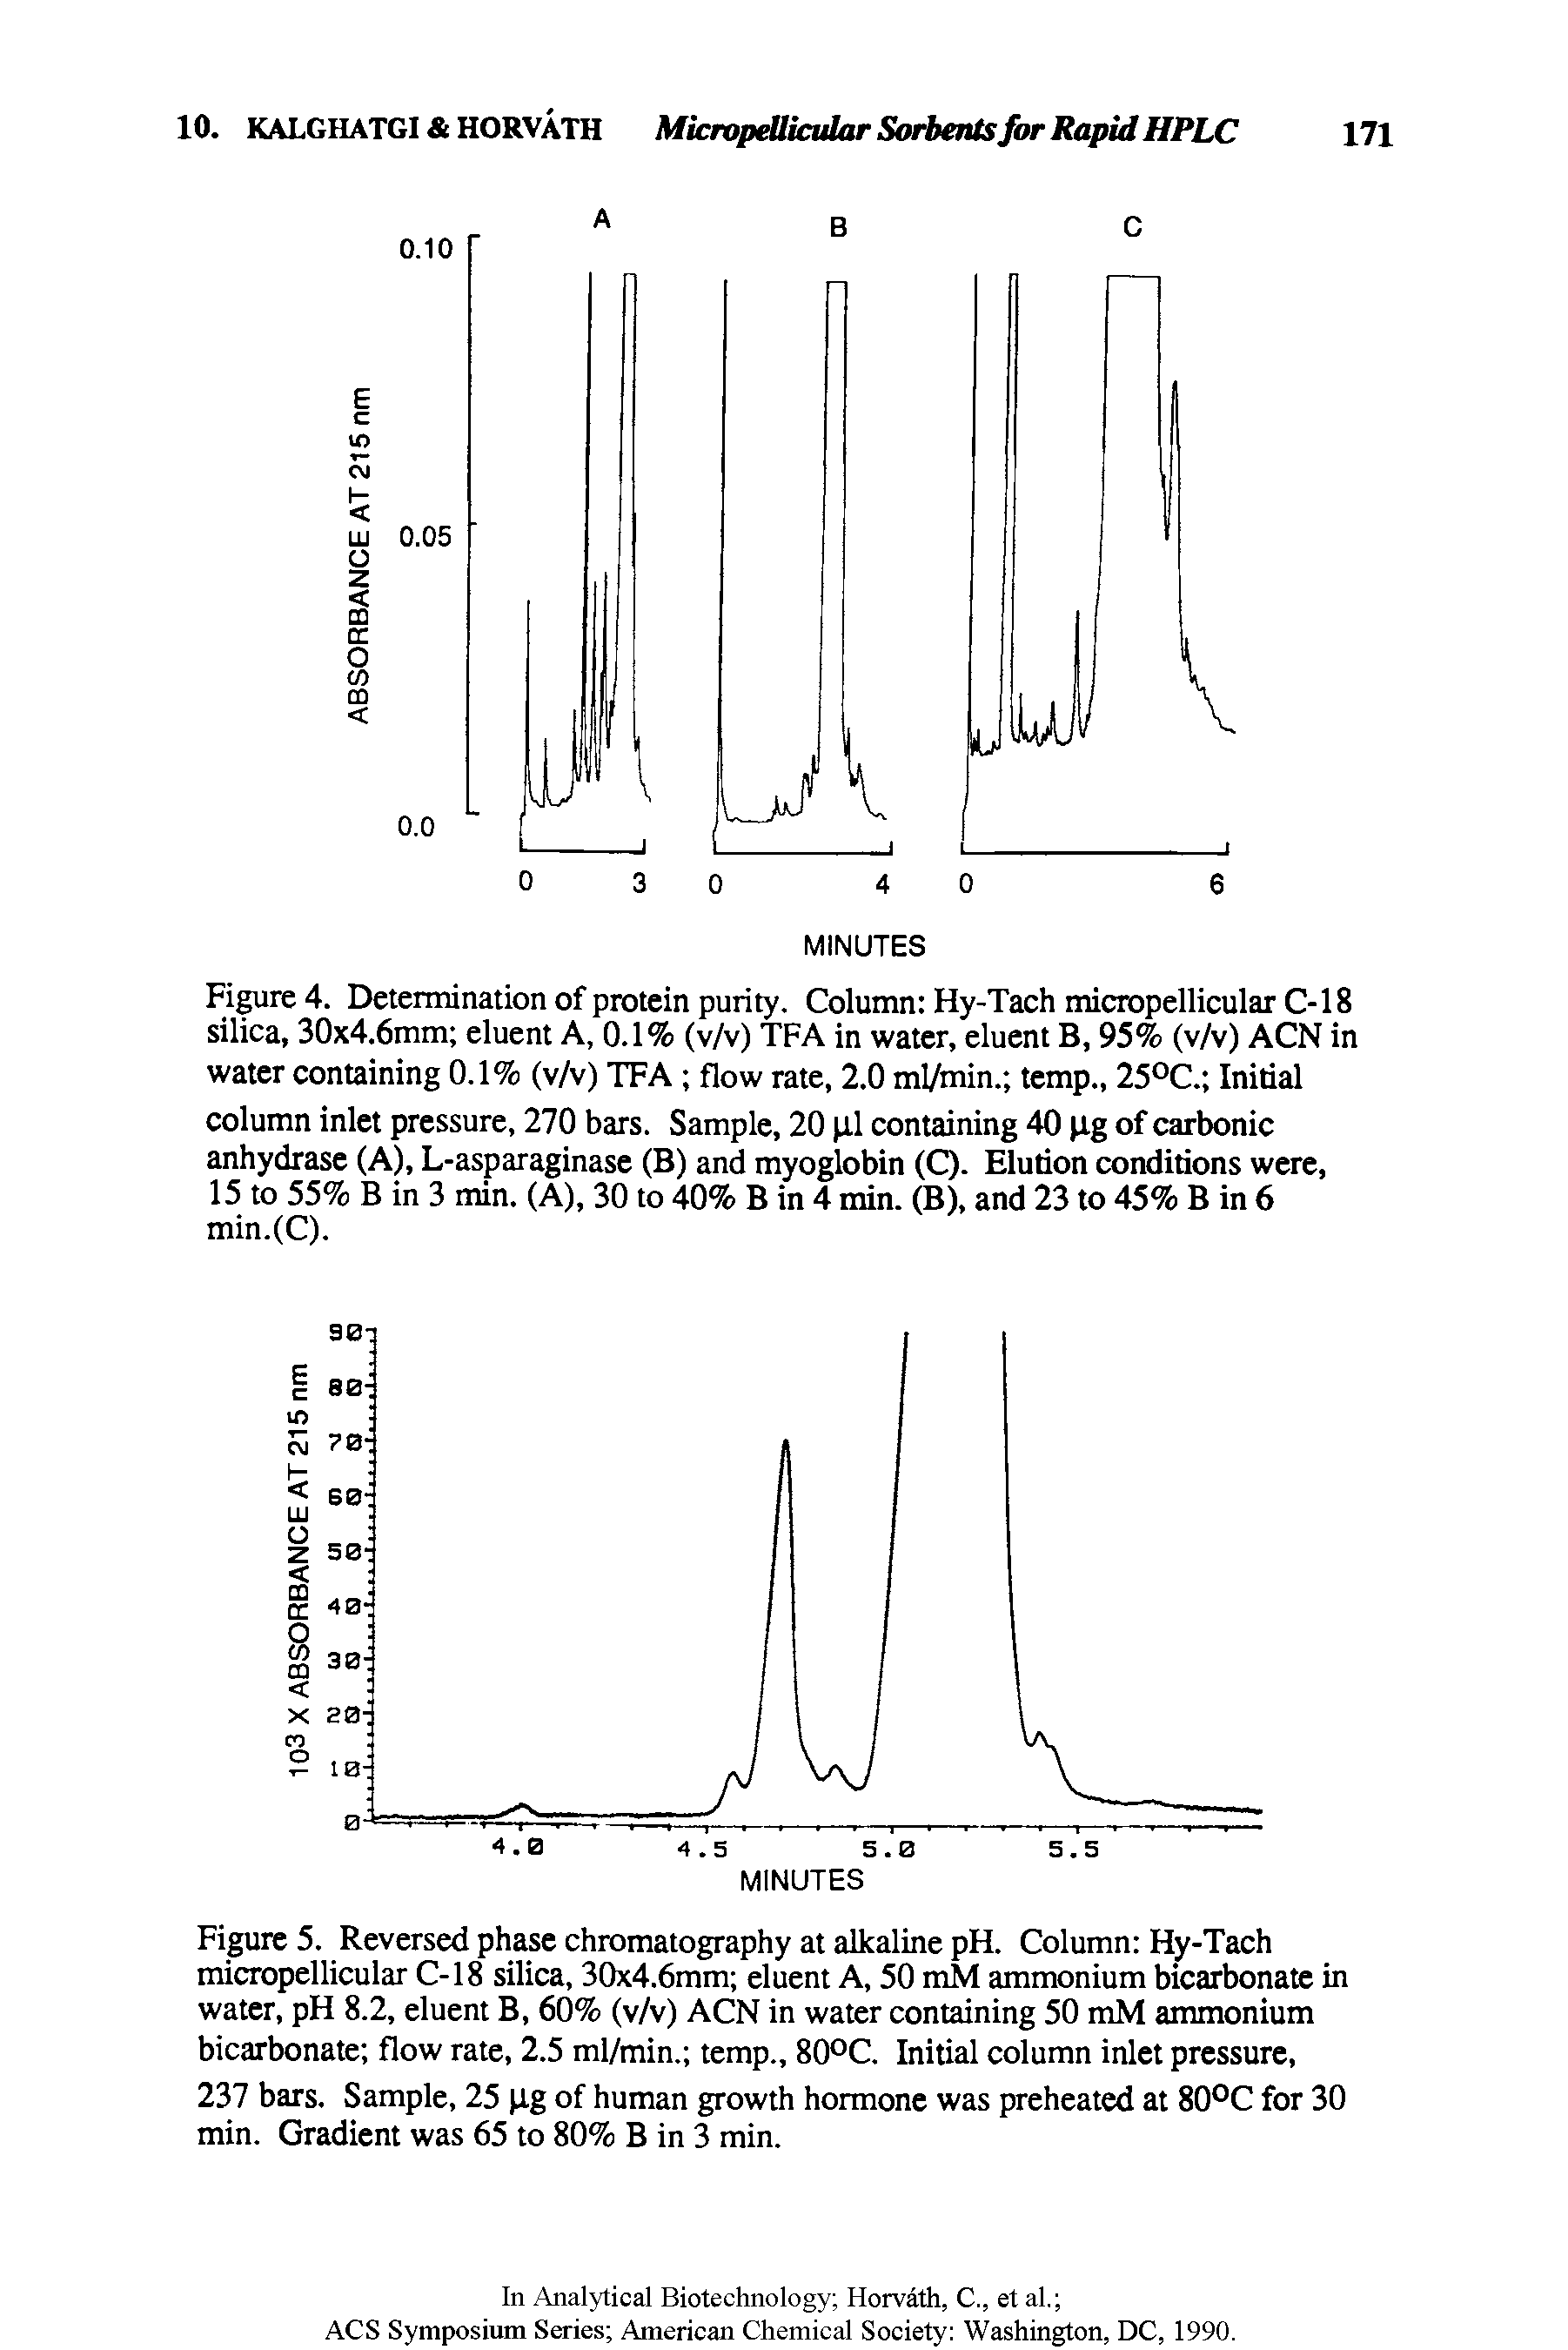 Figure 4. Determination of protein purity. Column Hy-Tach micropellicular C-18 silica, 30x4.6mm eluent A, 0.1% (v/v) TFA in water, eluent B, 95% (v/v) ACN in water containing 0.1% (v/v) TFA flow rate, 2.0 ml/min. temp., 25°C. Initial column inlet pressure, 270 bars. Sample, 20 JJ.1 containing 40 ig of carbonic anhydrase (A), L-asparaginase (B) and myoglobin (Q. Elution conditions were,...